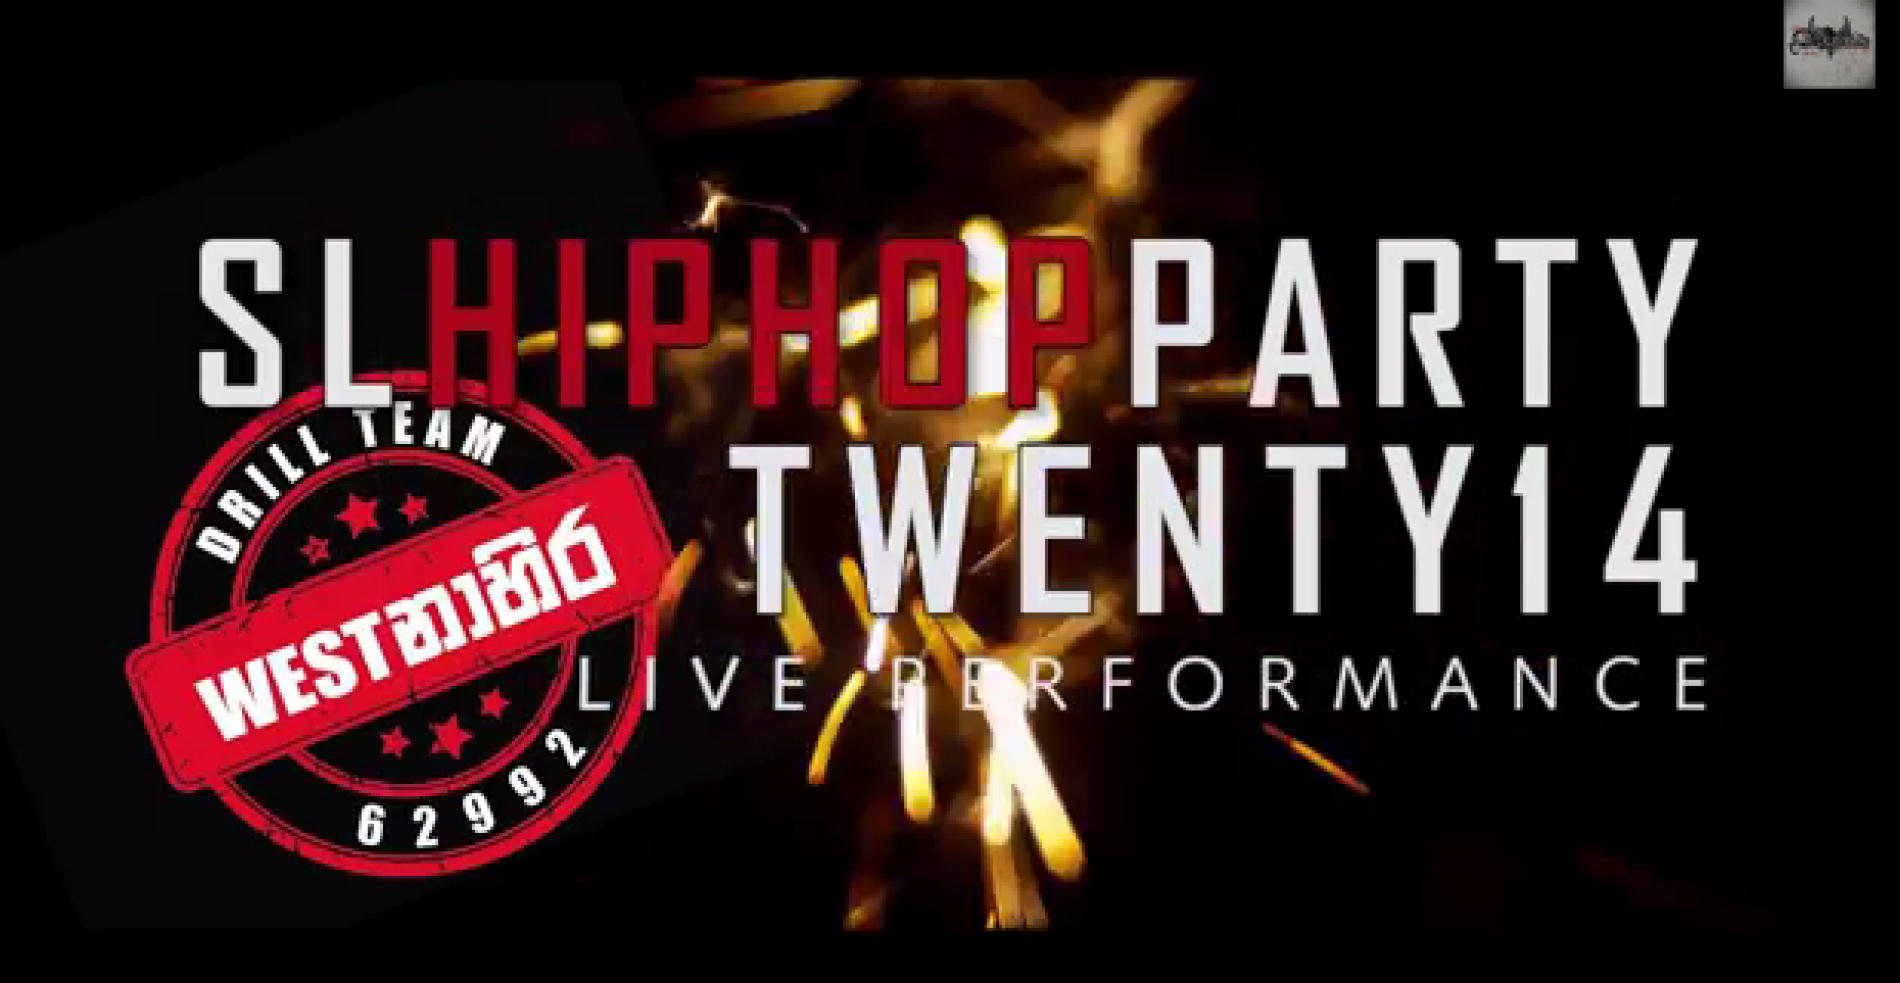 Drill Team: #Westනාහිර SL HipHop Party 2014 Live Performance